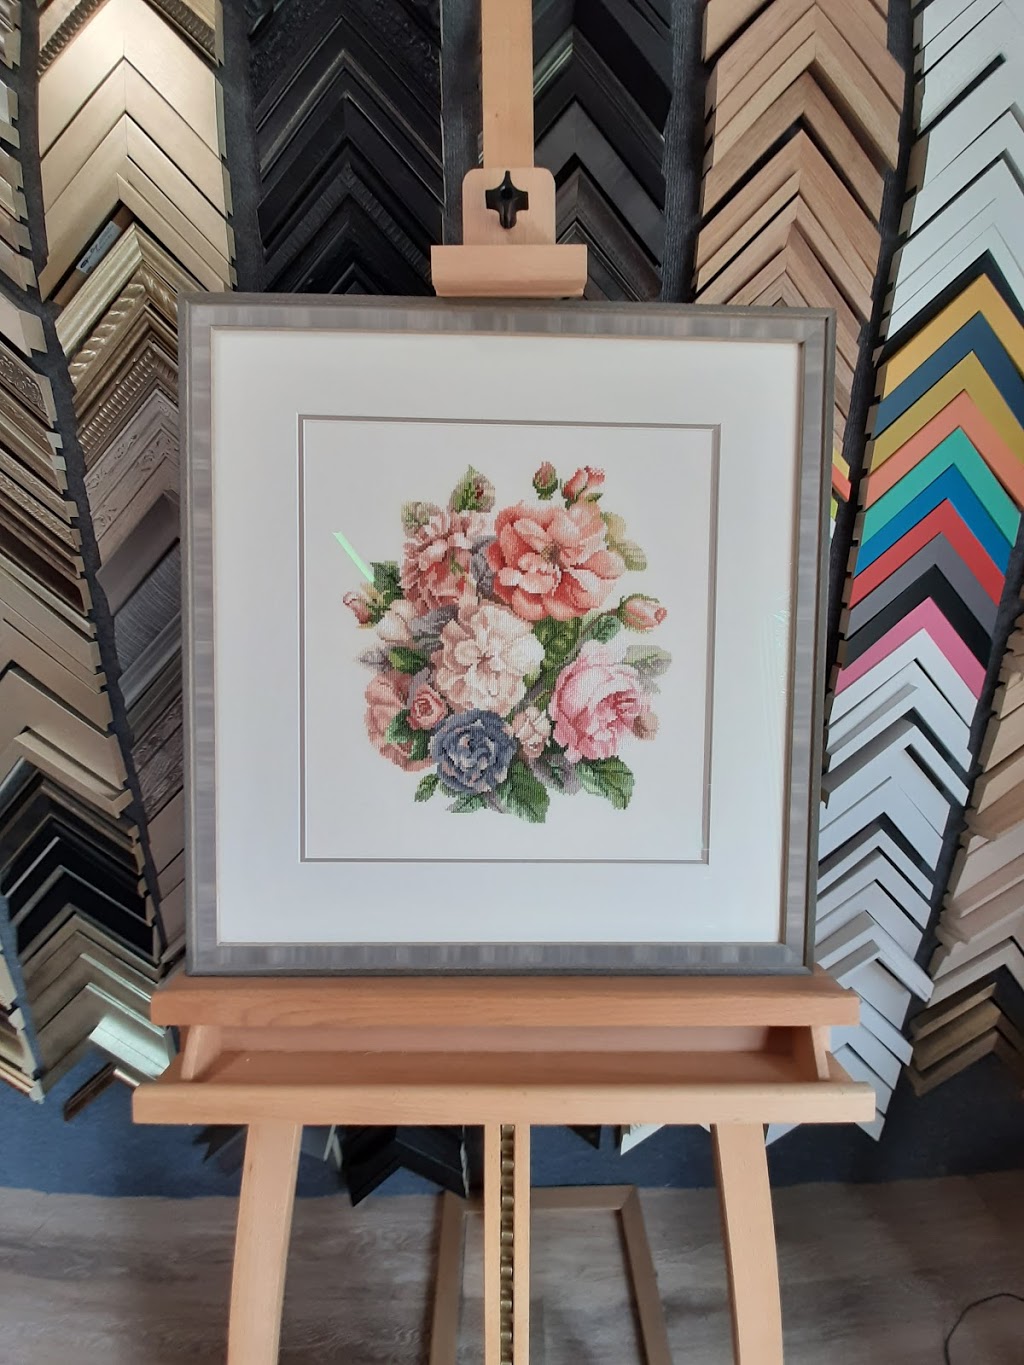 Picture Framing Studio 553 | store | 553 Nepean Hwy, Mount Martha VIC 3934, Australia | 0414652275 OR +61 414 652 275